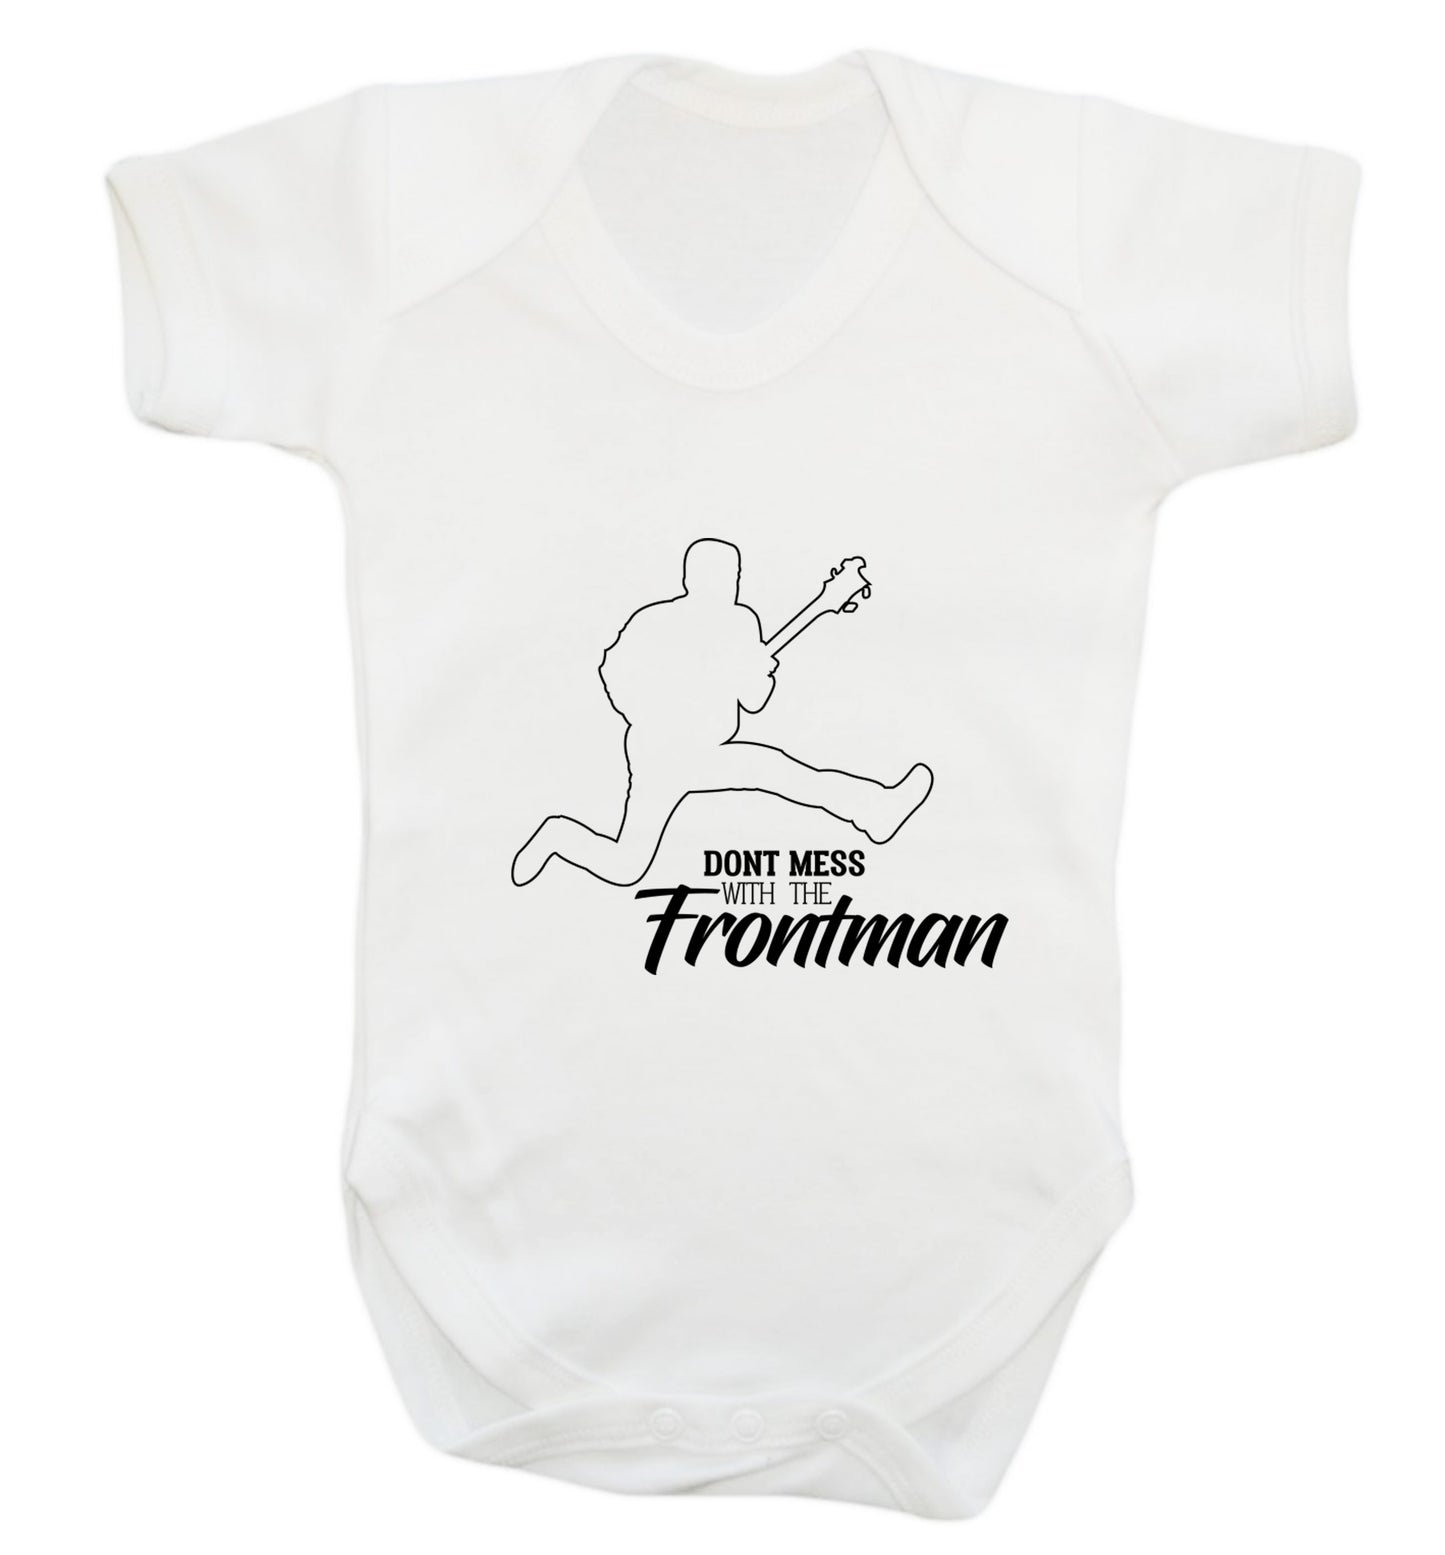 Don't mess with the frontman Baby Vest white 18-24 months